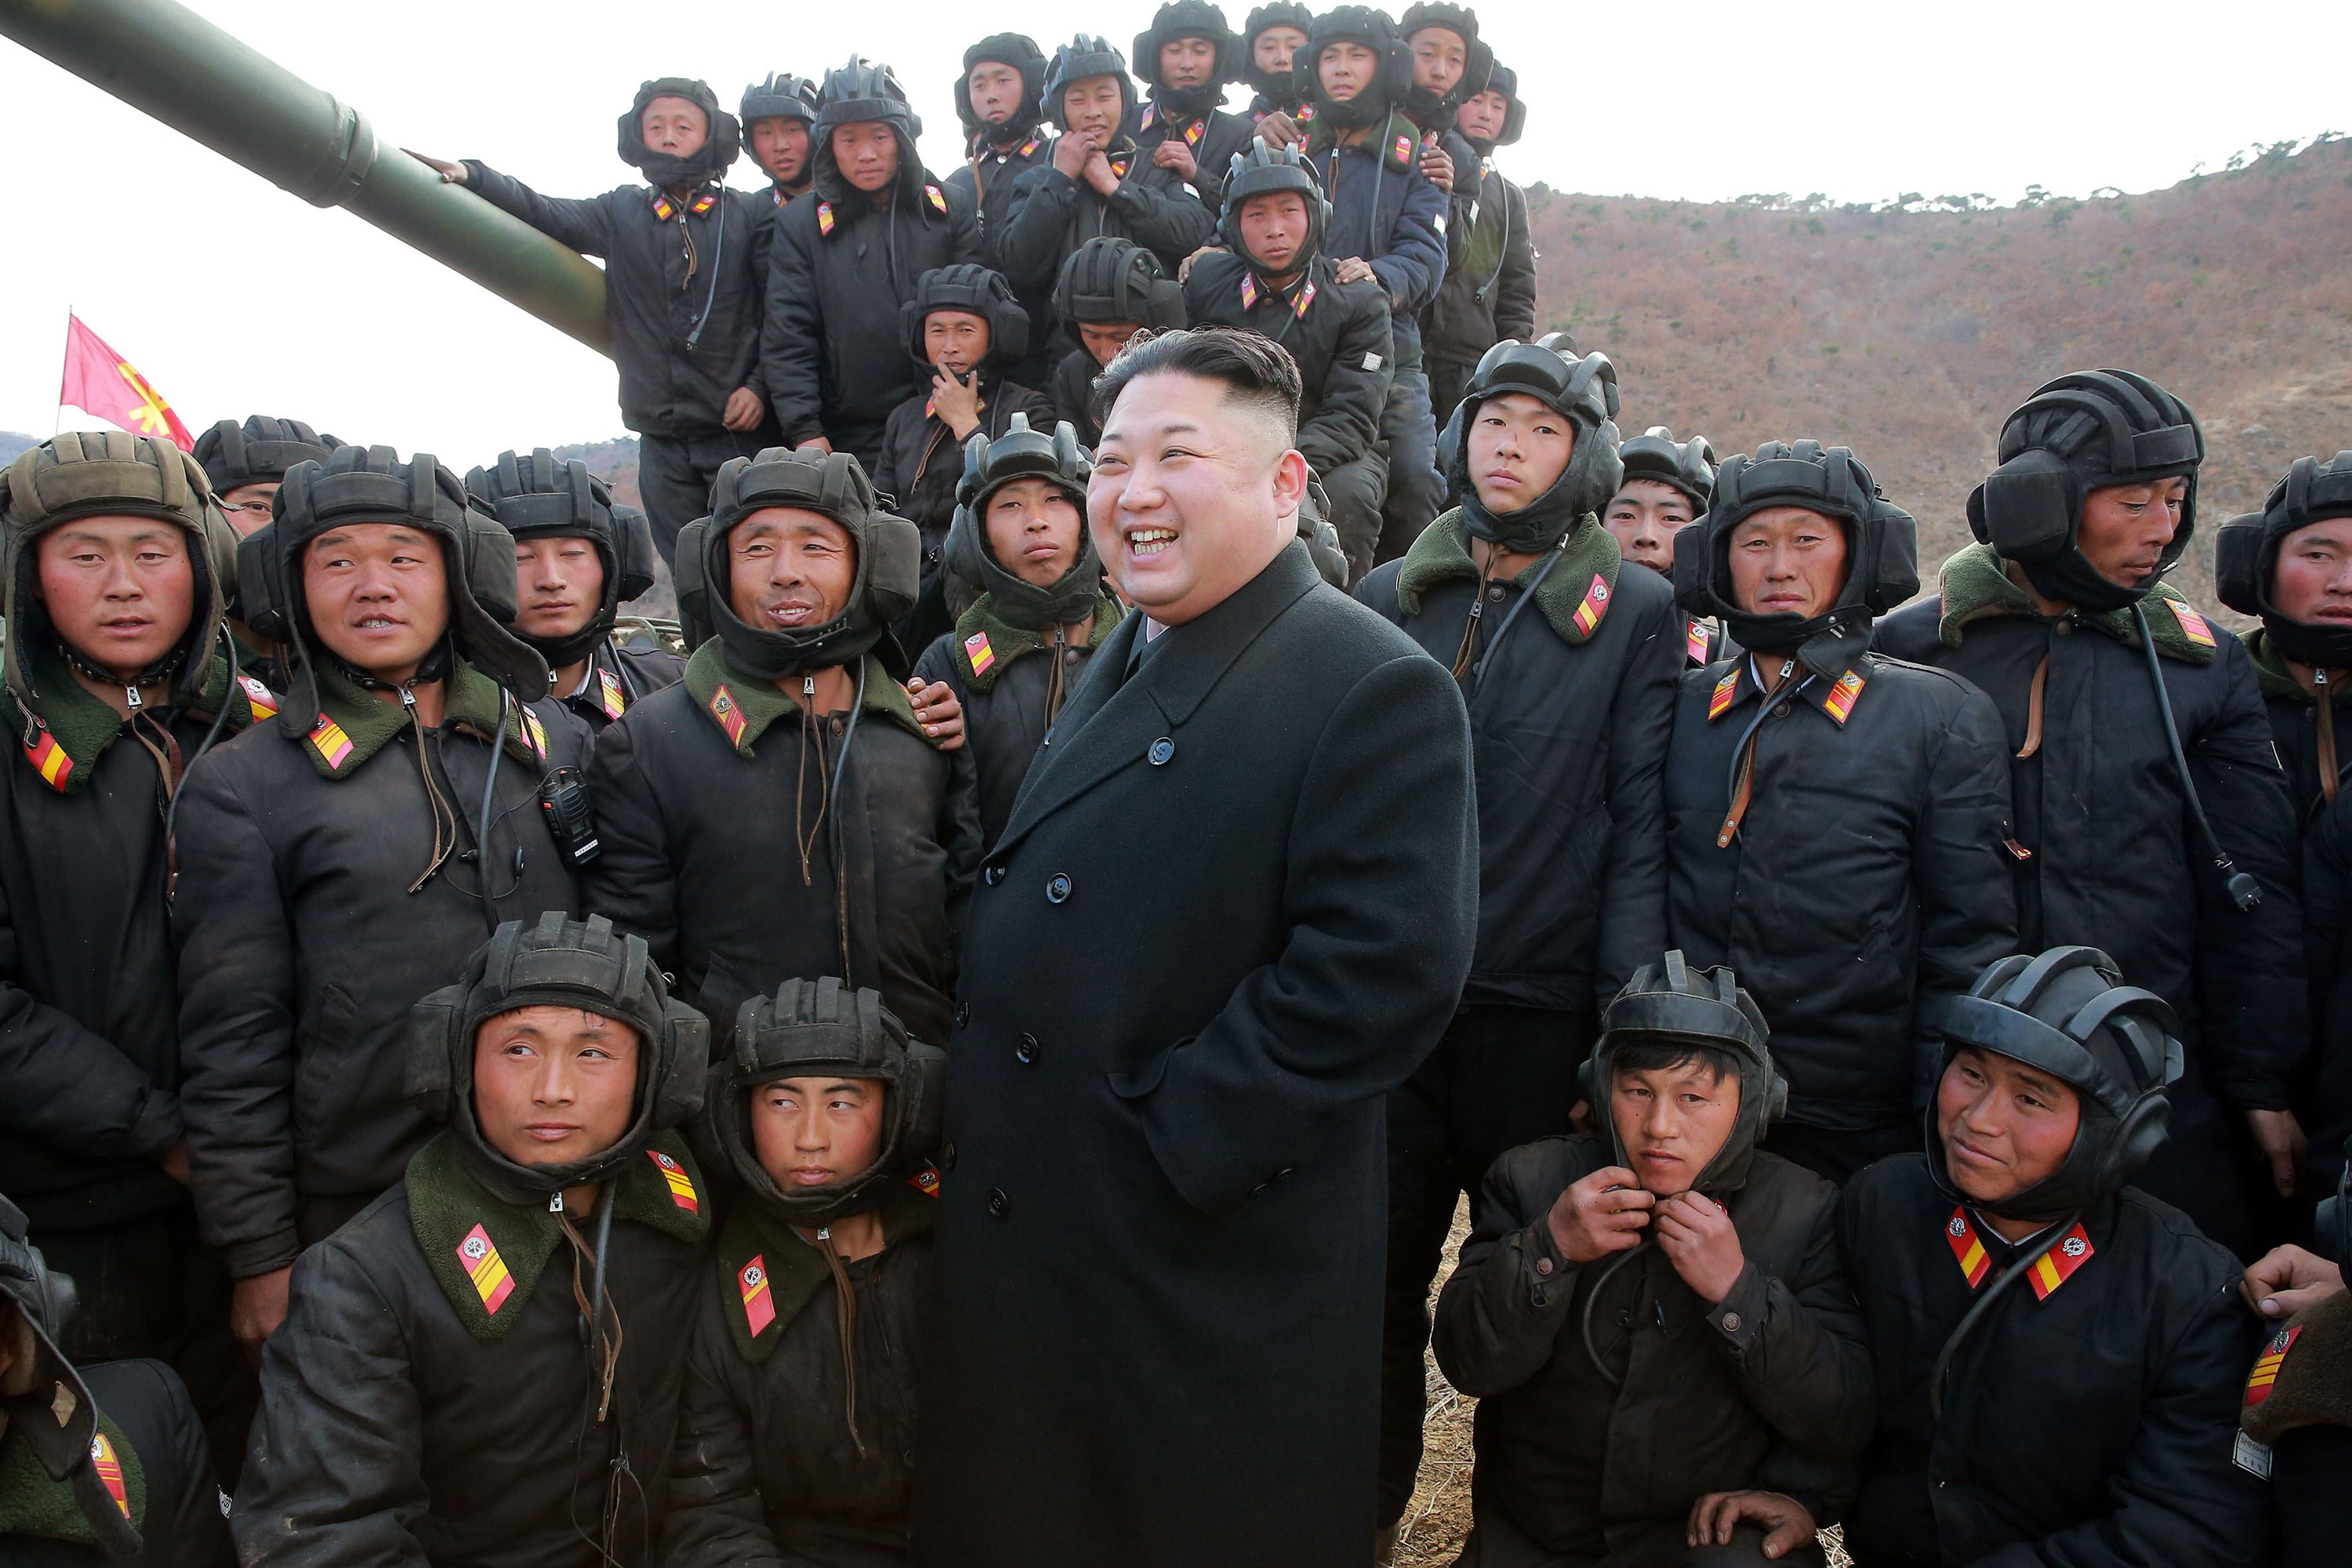 Kim Jong-un attends an army event on April 1 in Pyongyang, North Korea. South Koreans almost certainly understand that the South has a very substantial technological advantage, not least in weaponry, compared with the North. Photo: KCNA